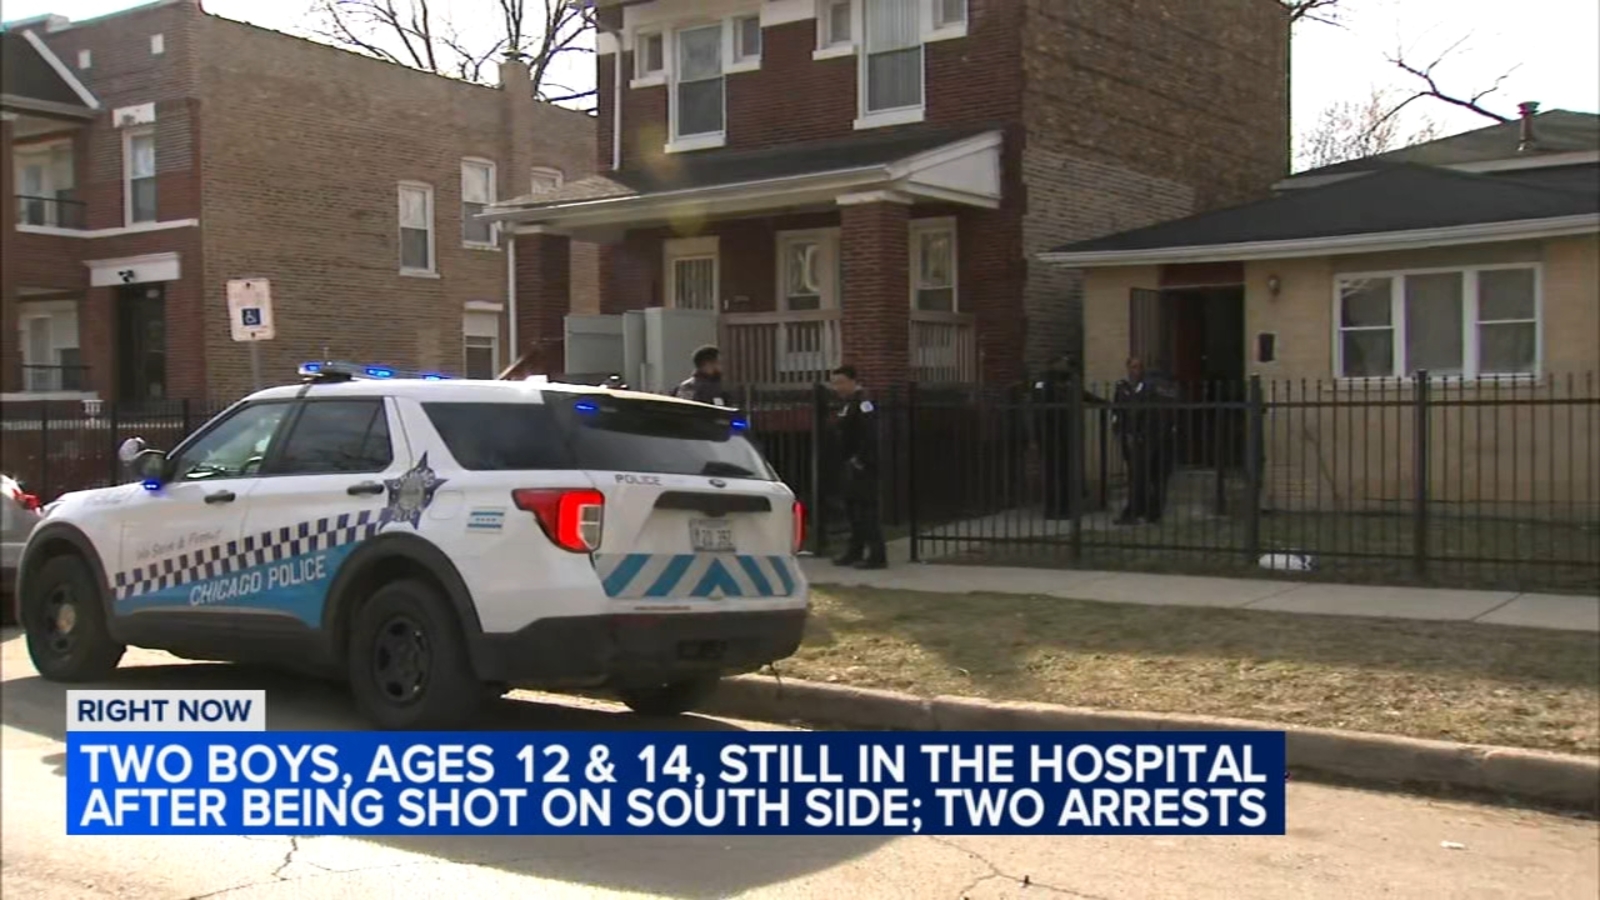 Teen faces stolen car charges, may be linked to South Shore shooting of boys, 12 and 14